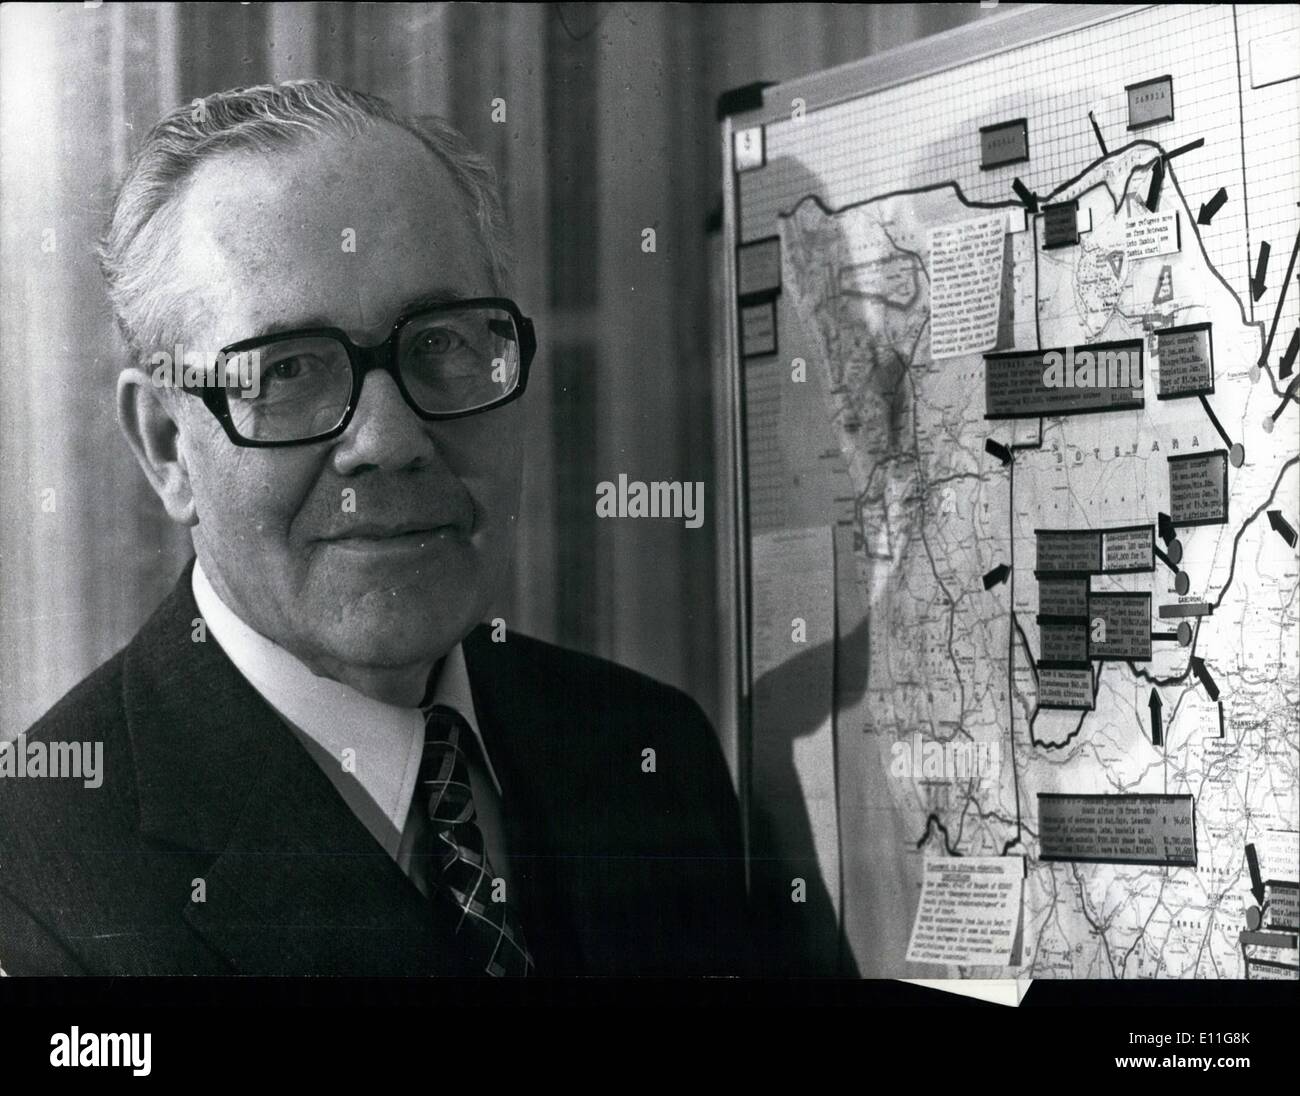 Jan. 01, 1978 - New UN-high commissioner for refugees, Mr. Hartling, at work in Geneva. : This week the new UN-high commissioner for refugees, former danish prime-minister Poul Hartling, started work at his office at Geneva. Photo shows him in front of a south-Arica-map there. Stock Photo